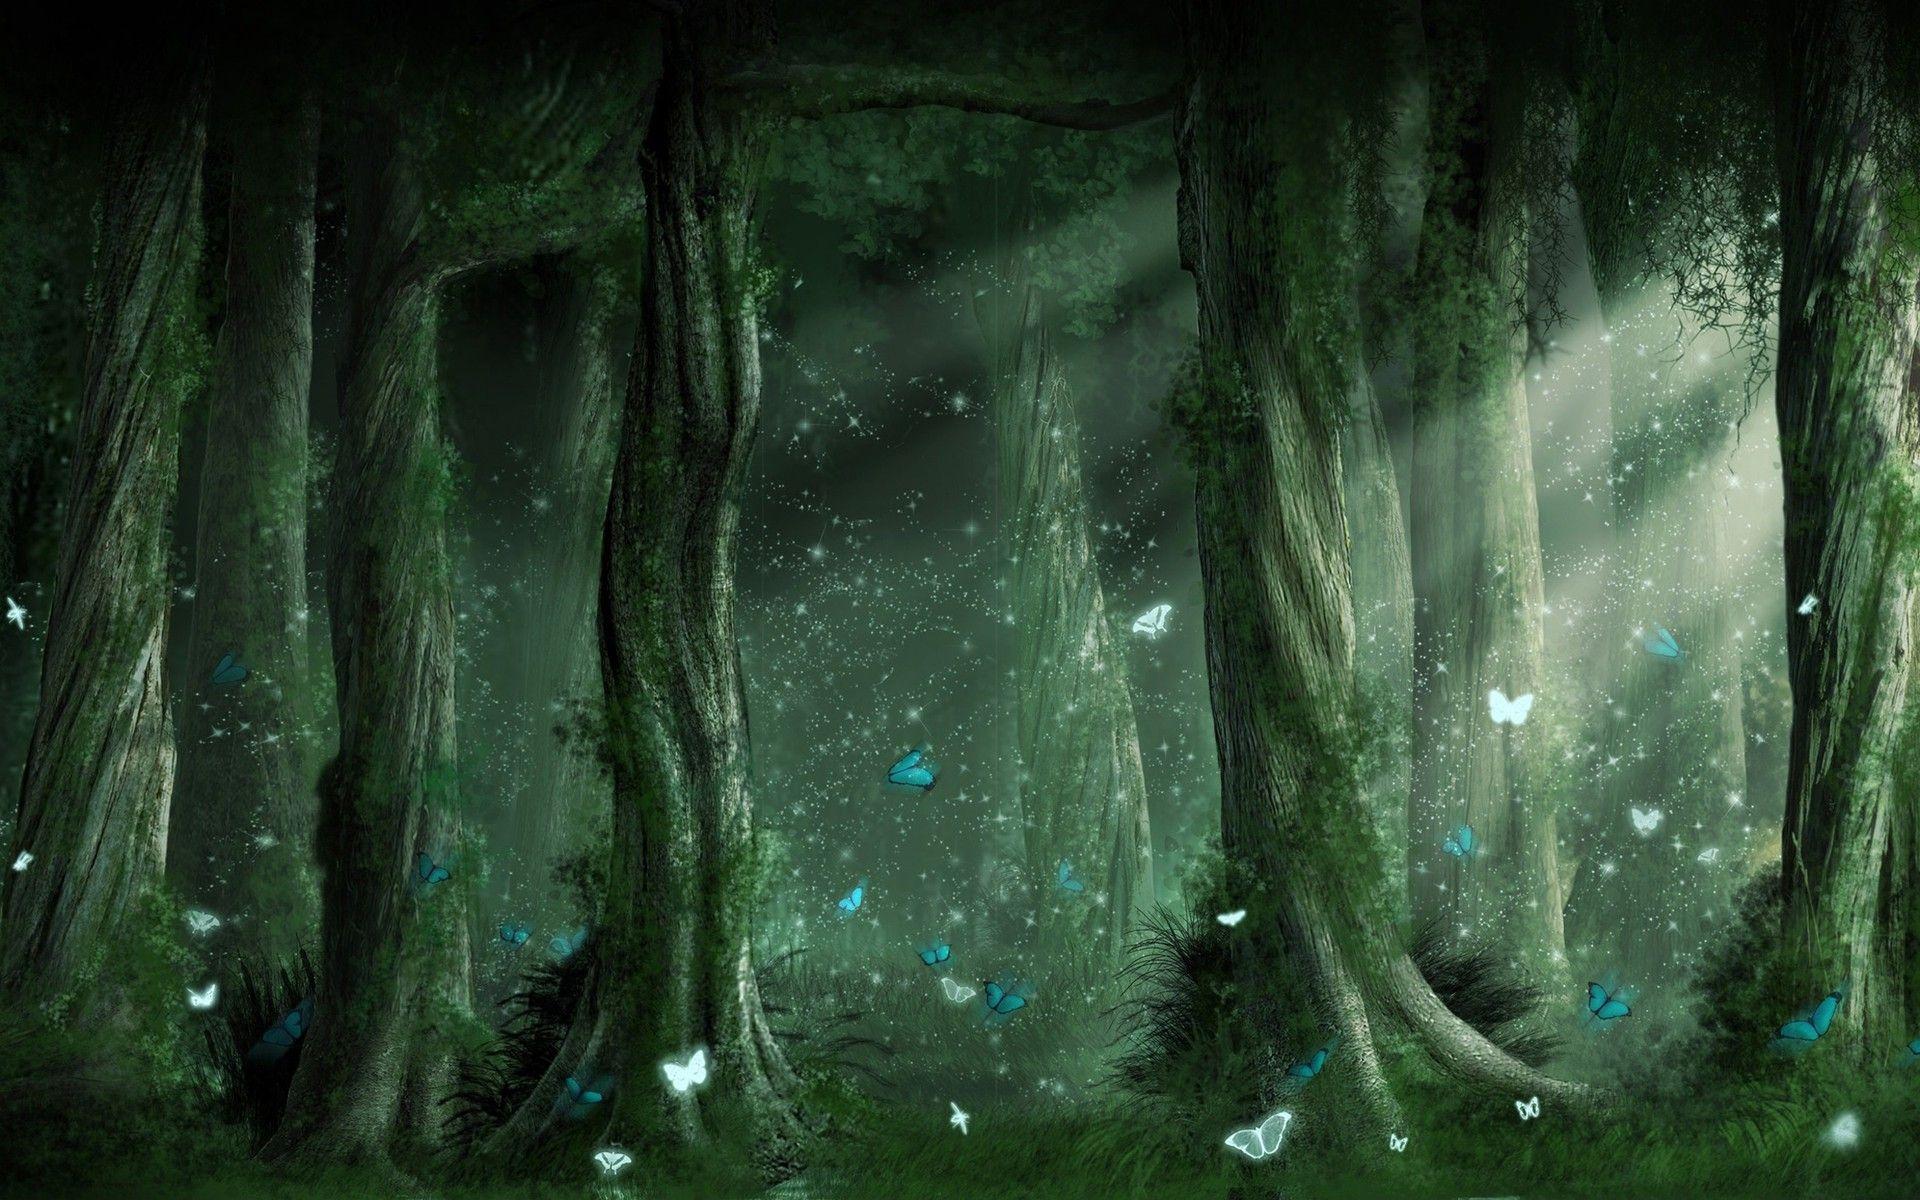 Magical Forest Wallpapers Top Free Magical Forest Backgrounds